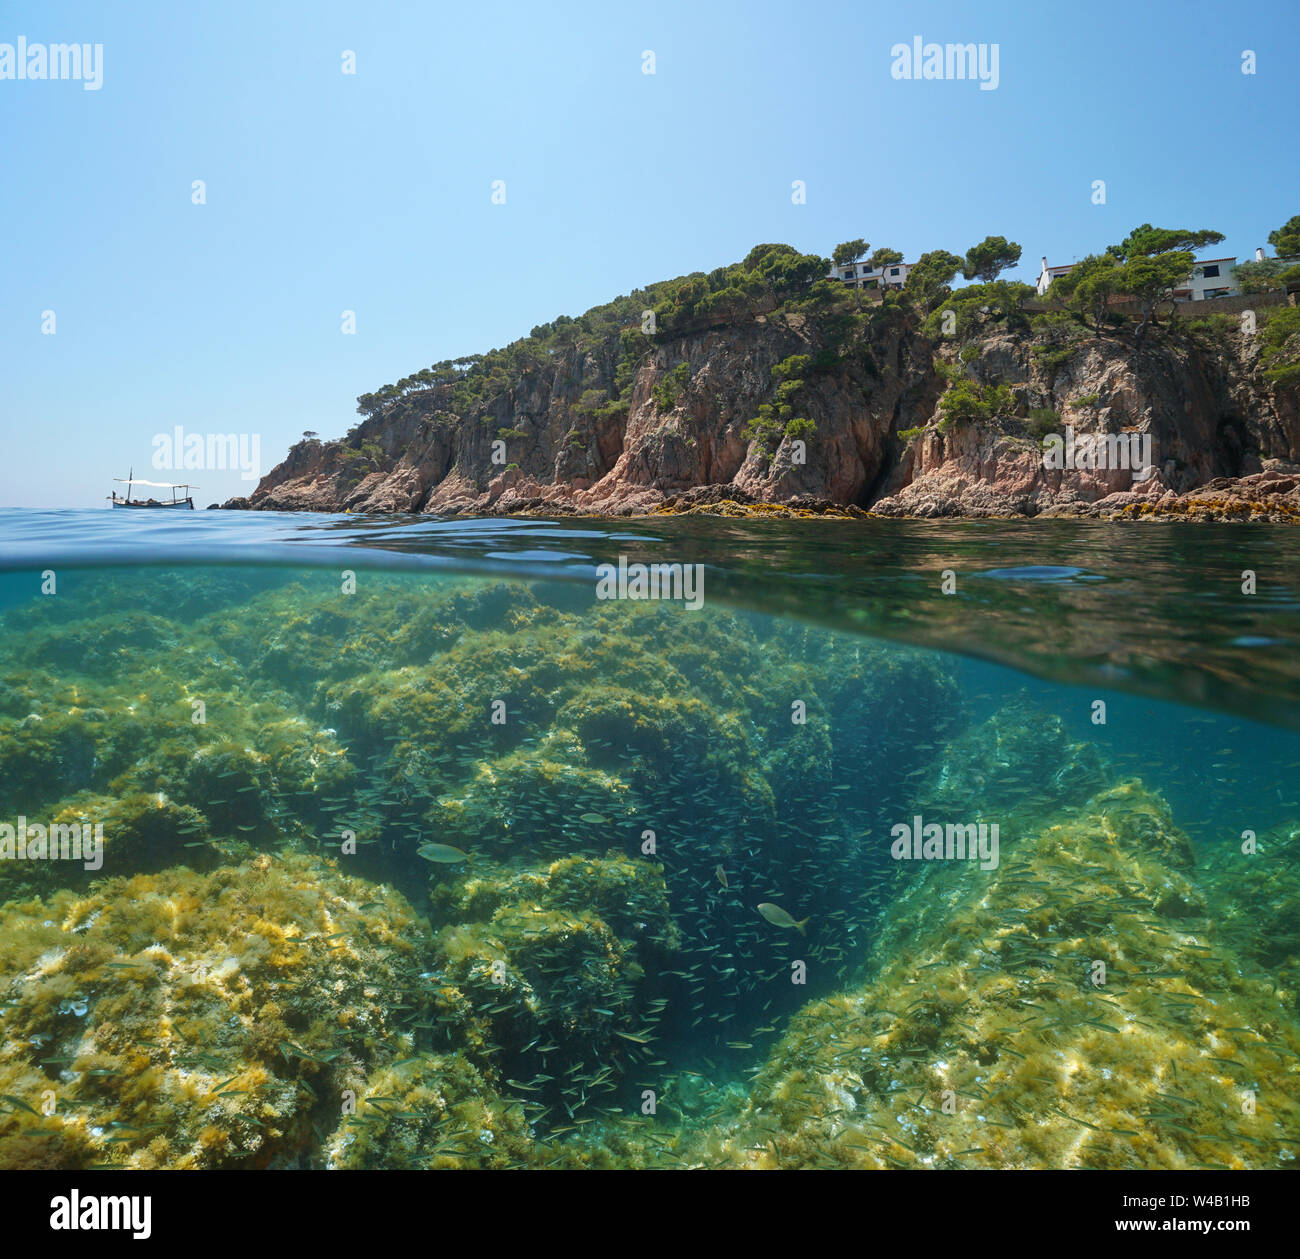 Spain rocky coast with a shoal of small fish underwater, Mediterranean sea, split view above and below water, Costa Brava,  Palafrugell, Catalonia Stock Photo